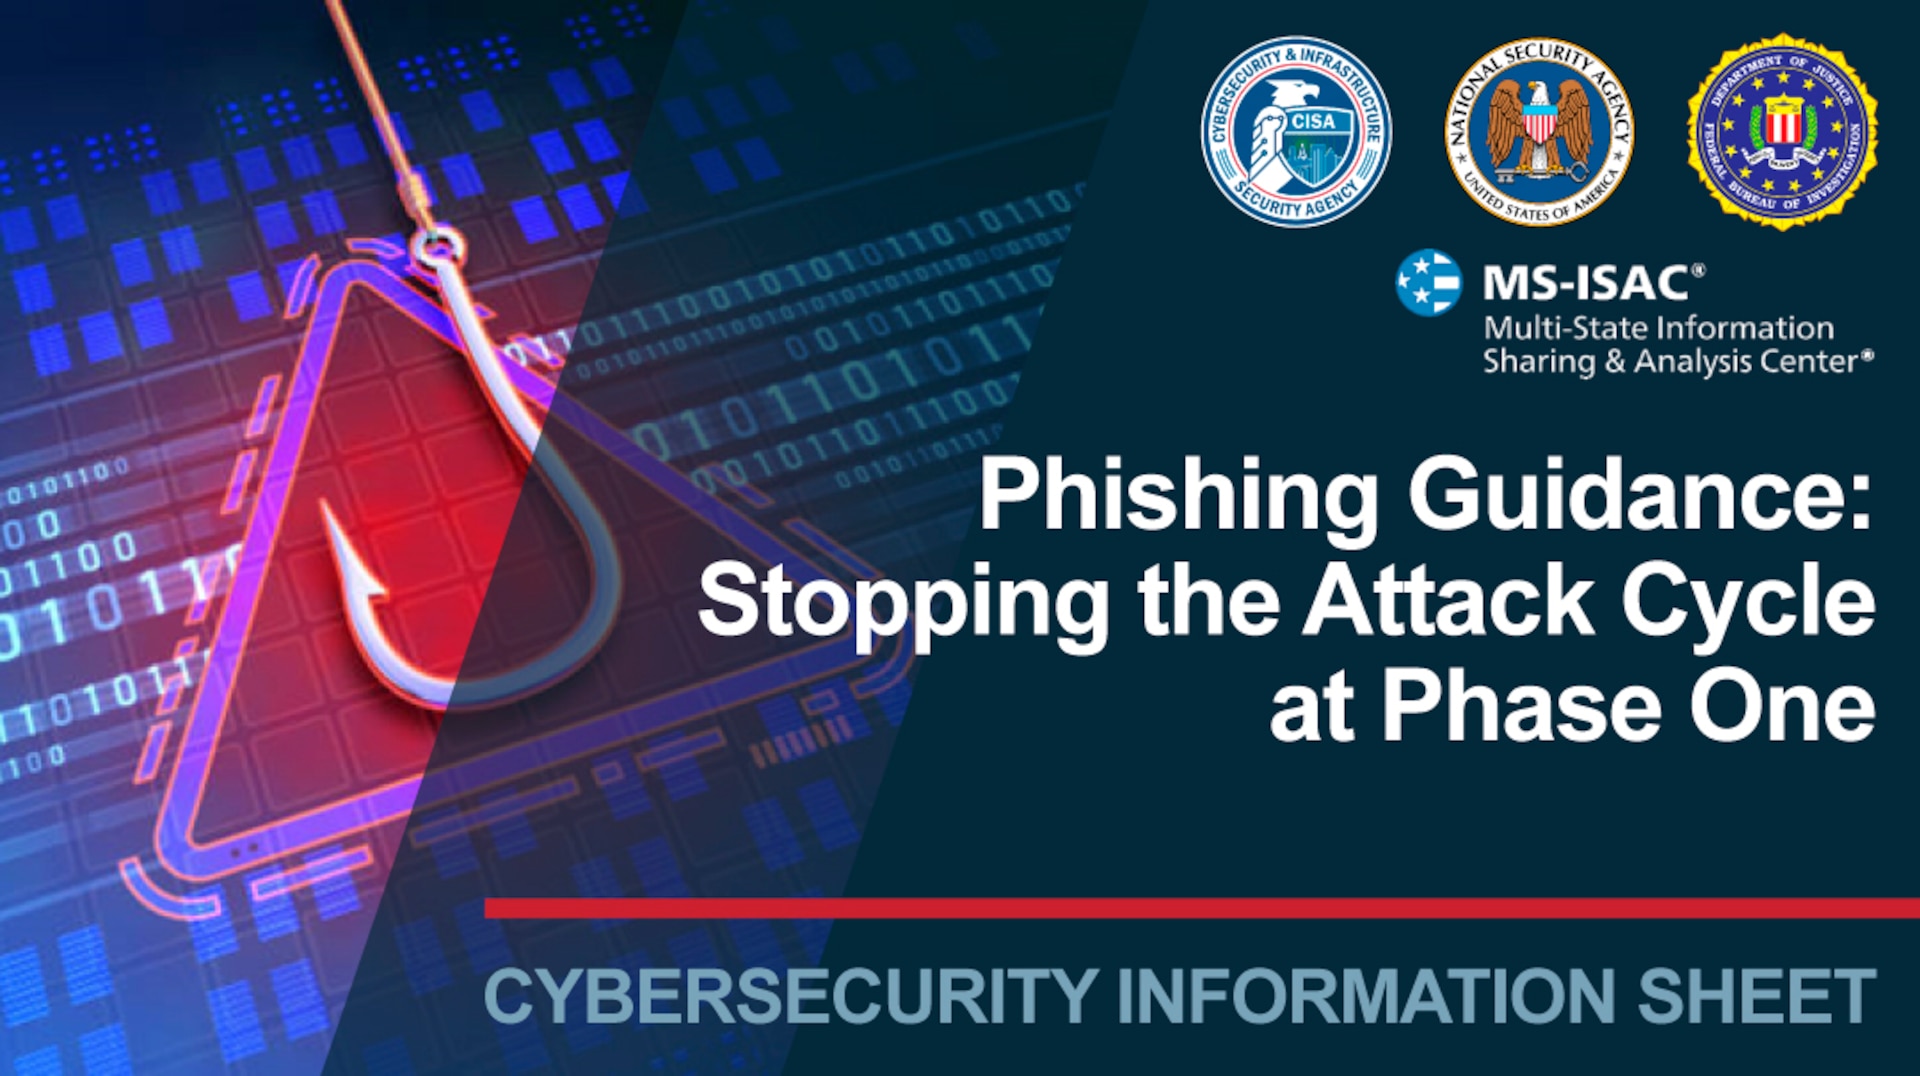 Phishing Guidance: Stopping the Attack Cycle at Phase One. Cybersecurity Information Sheet.